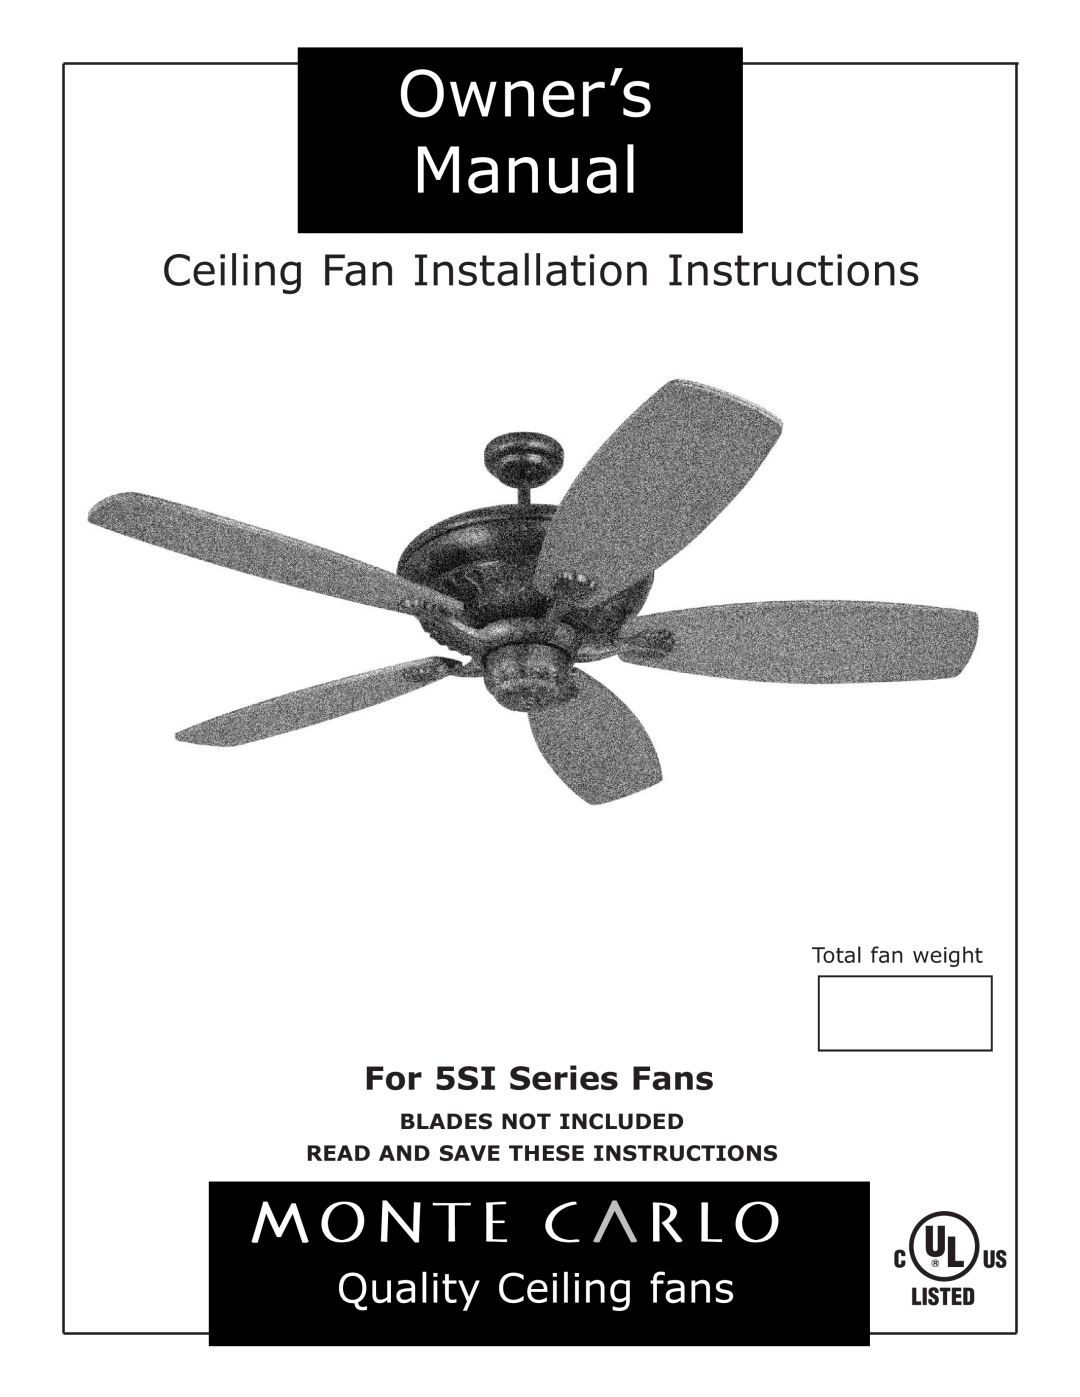 Monte Carlo Fan Company 5SI owner manual Total fan weight, Blades Not Included, Read And Save These Instructions 